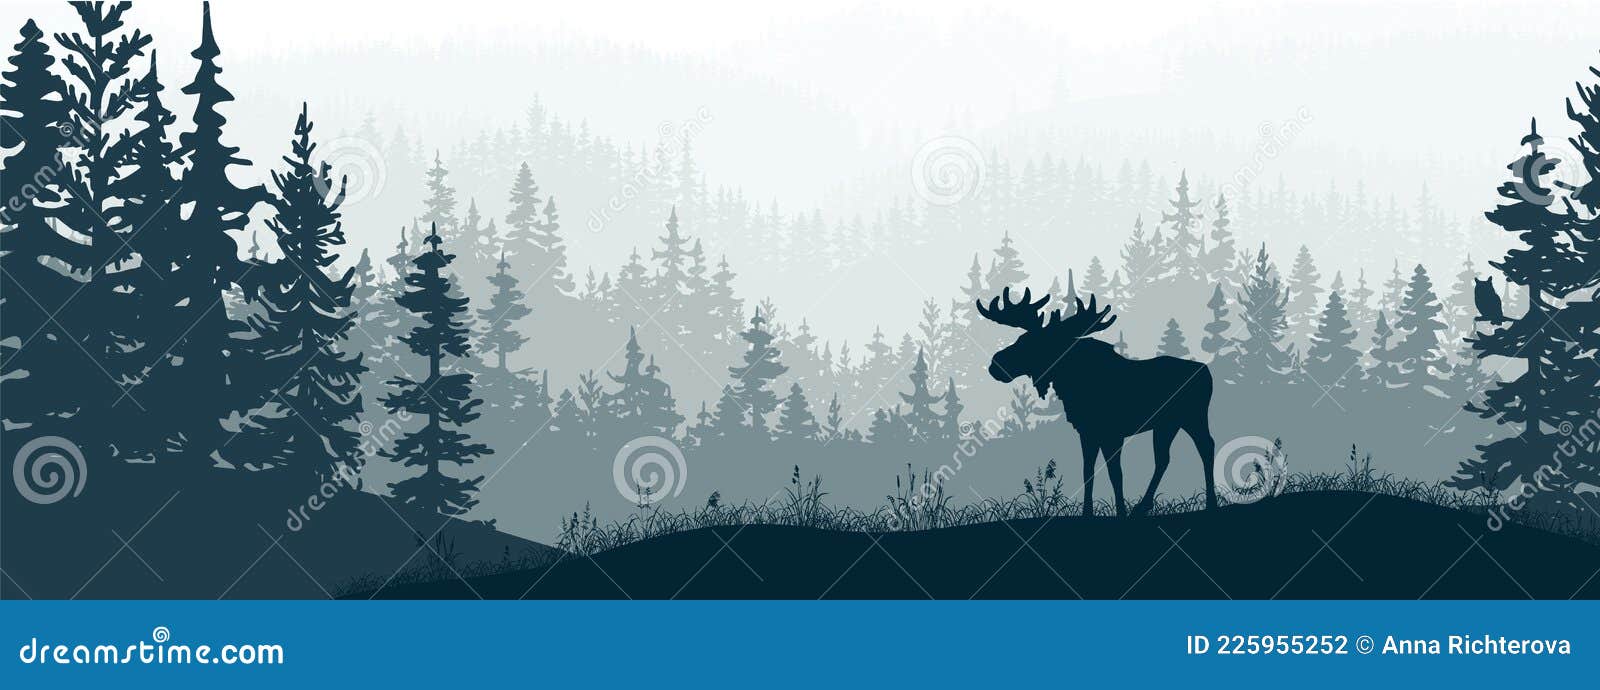 horizontal banner. silhouette of moose standing on meadow in forrest. silhouette of animal, trees, grass.